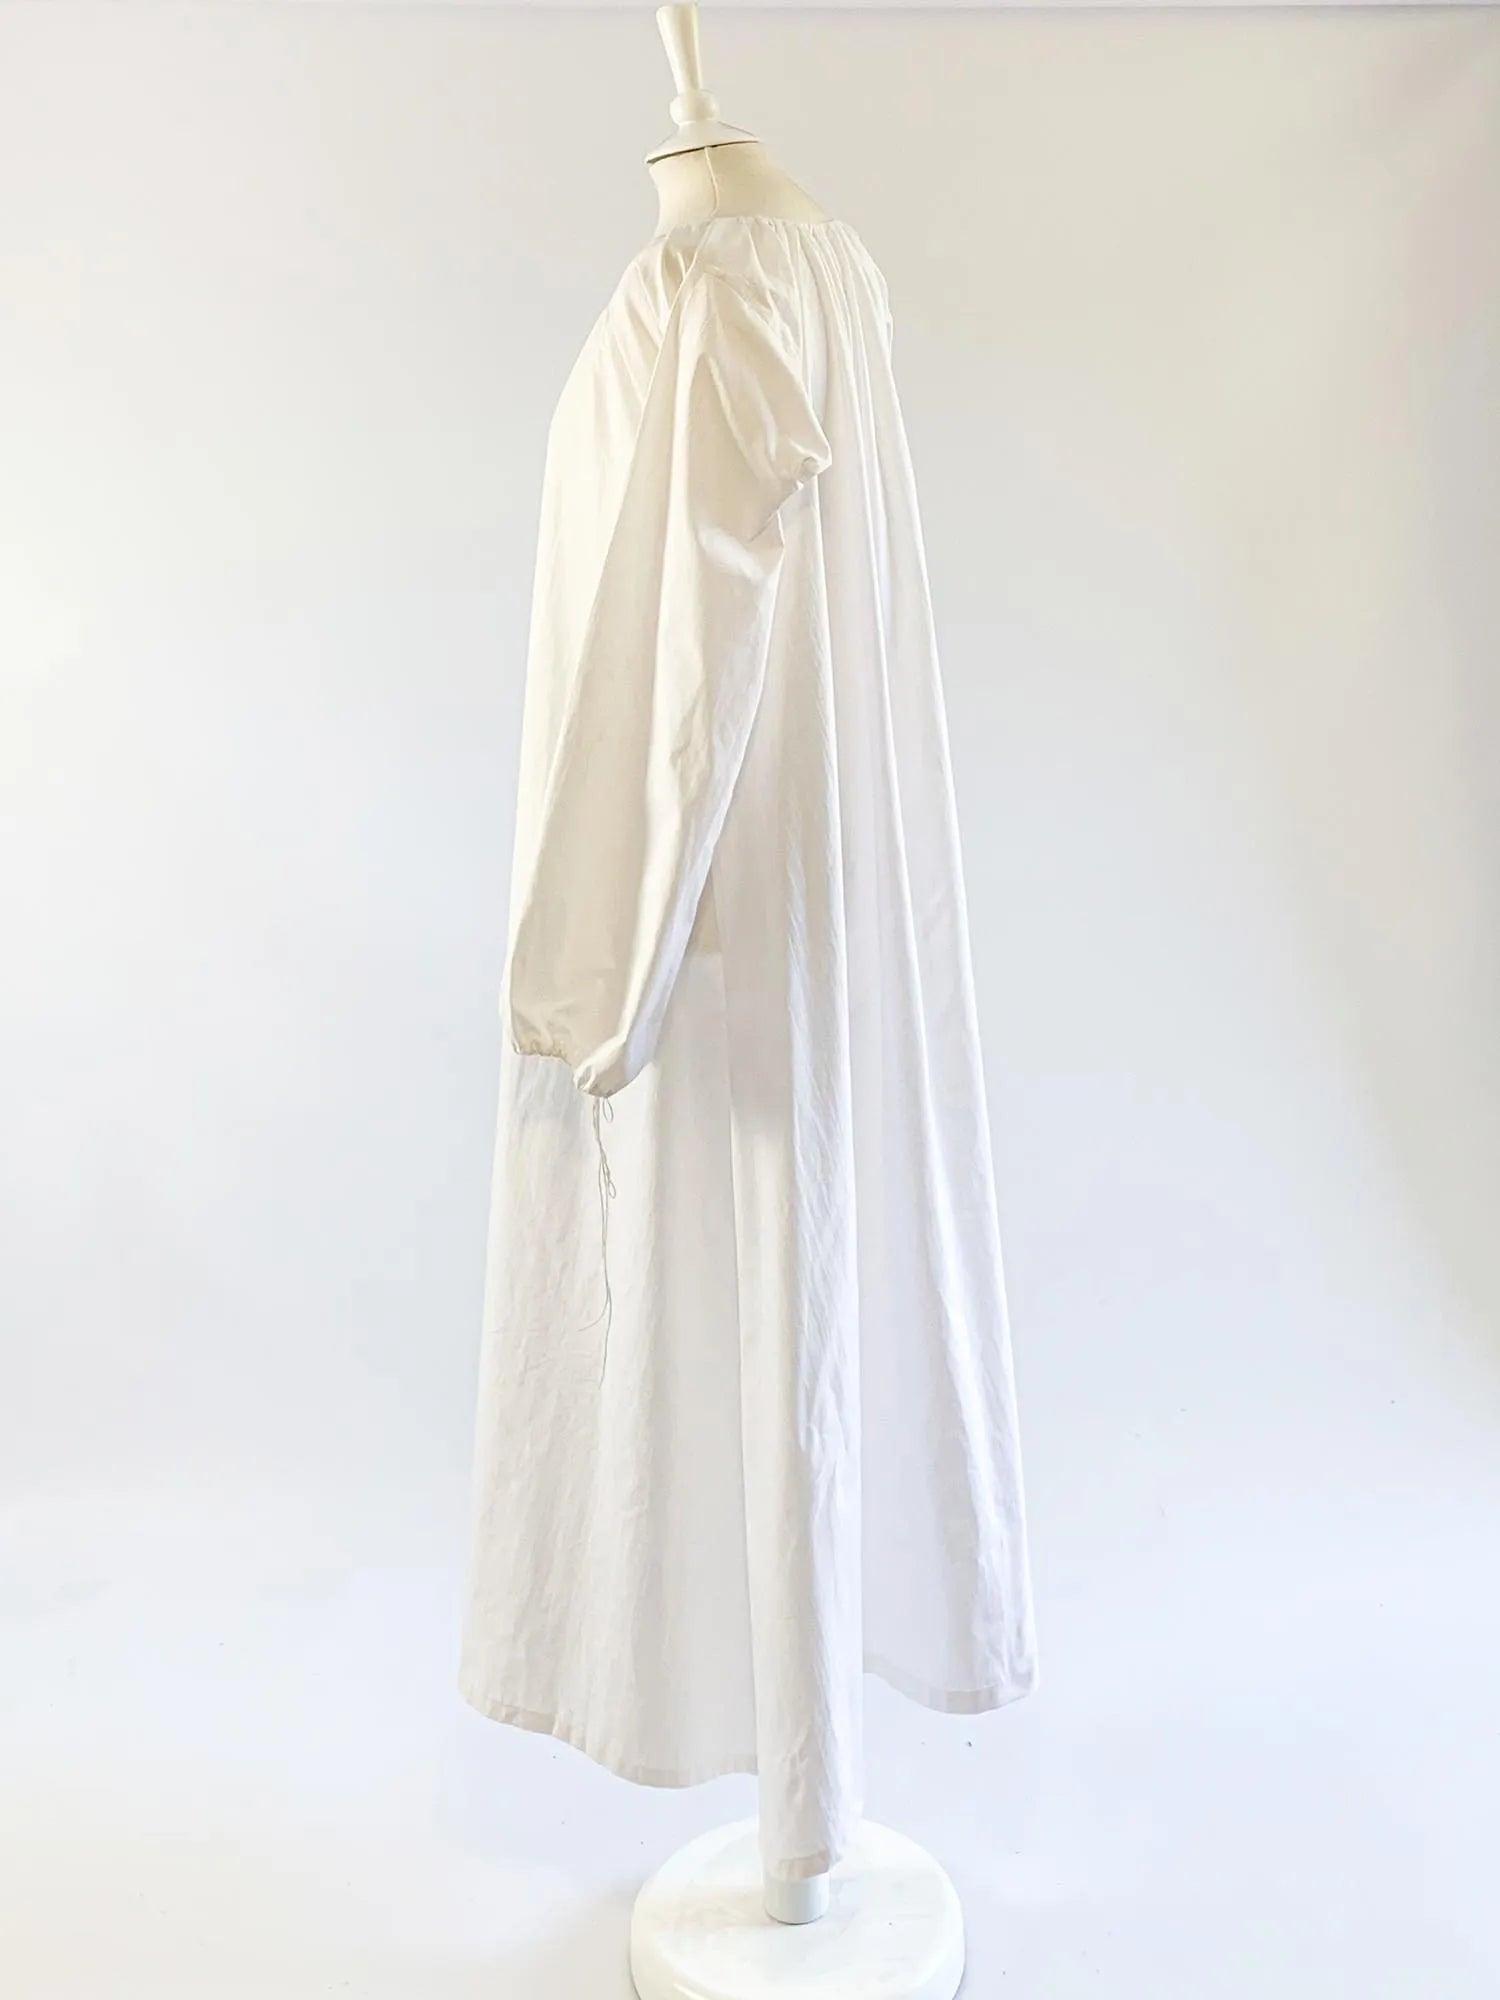 Renaissance Chemise in Cotton With Long Sleeves - Atelier Serraspina